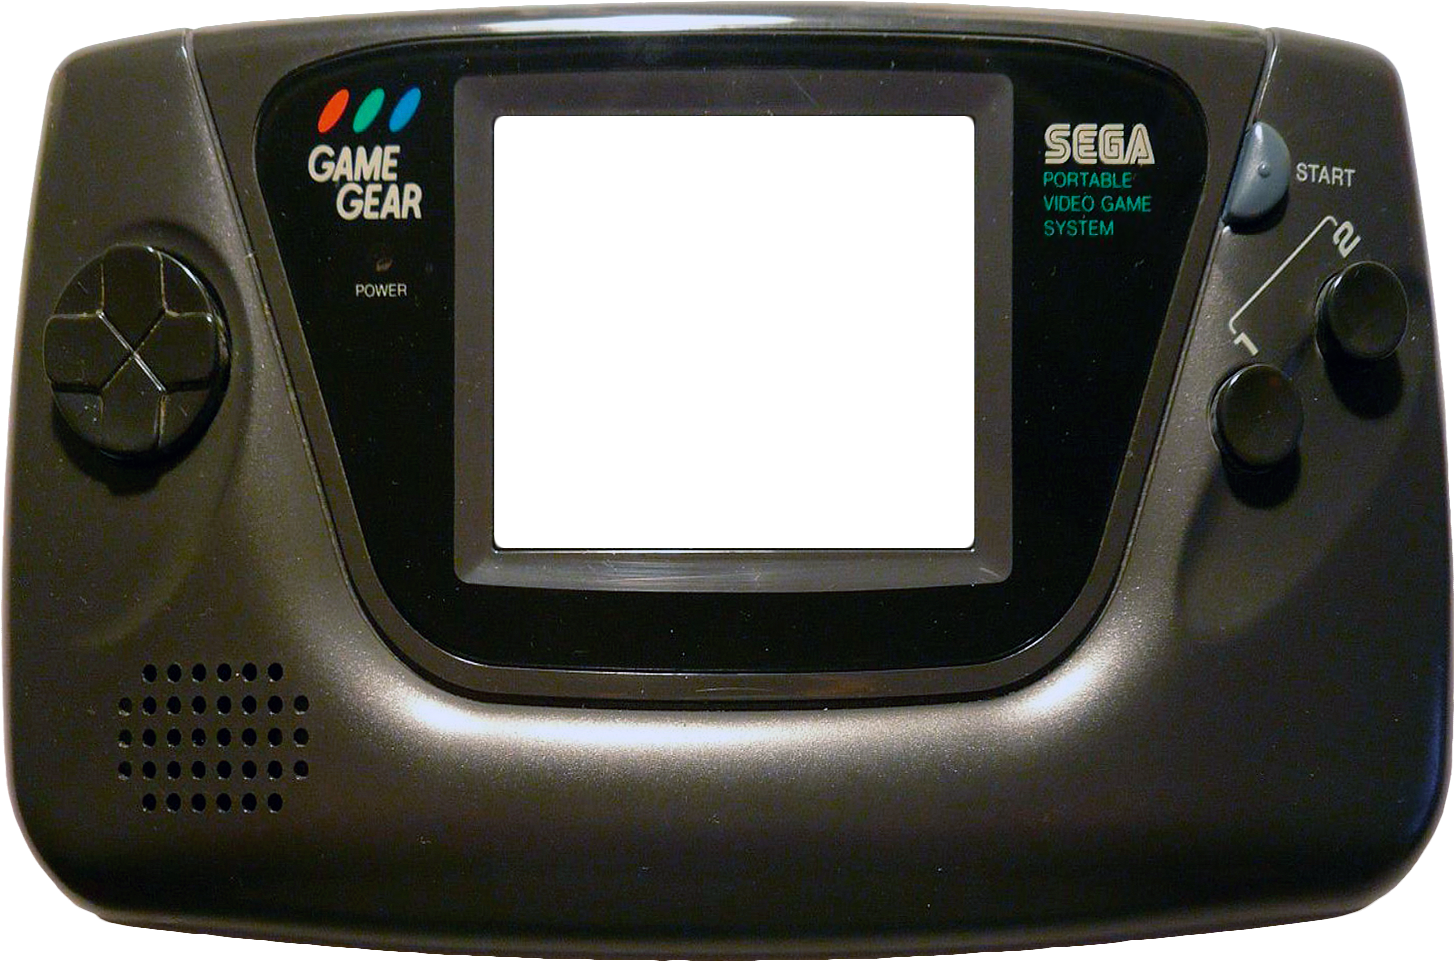 Ultimate game gear. Сега гейм Геар. Game Gear White. Game Gear logo. Game Gear me Gear.